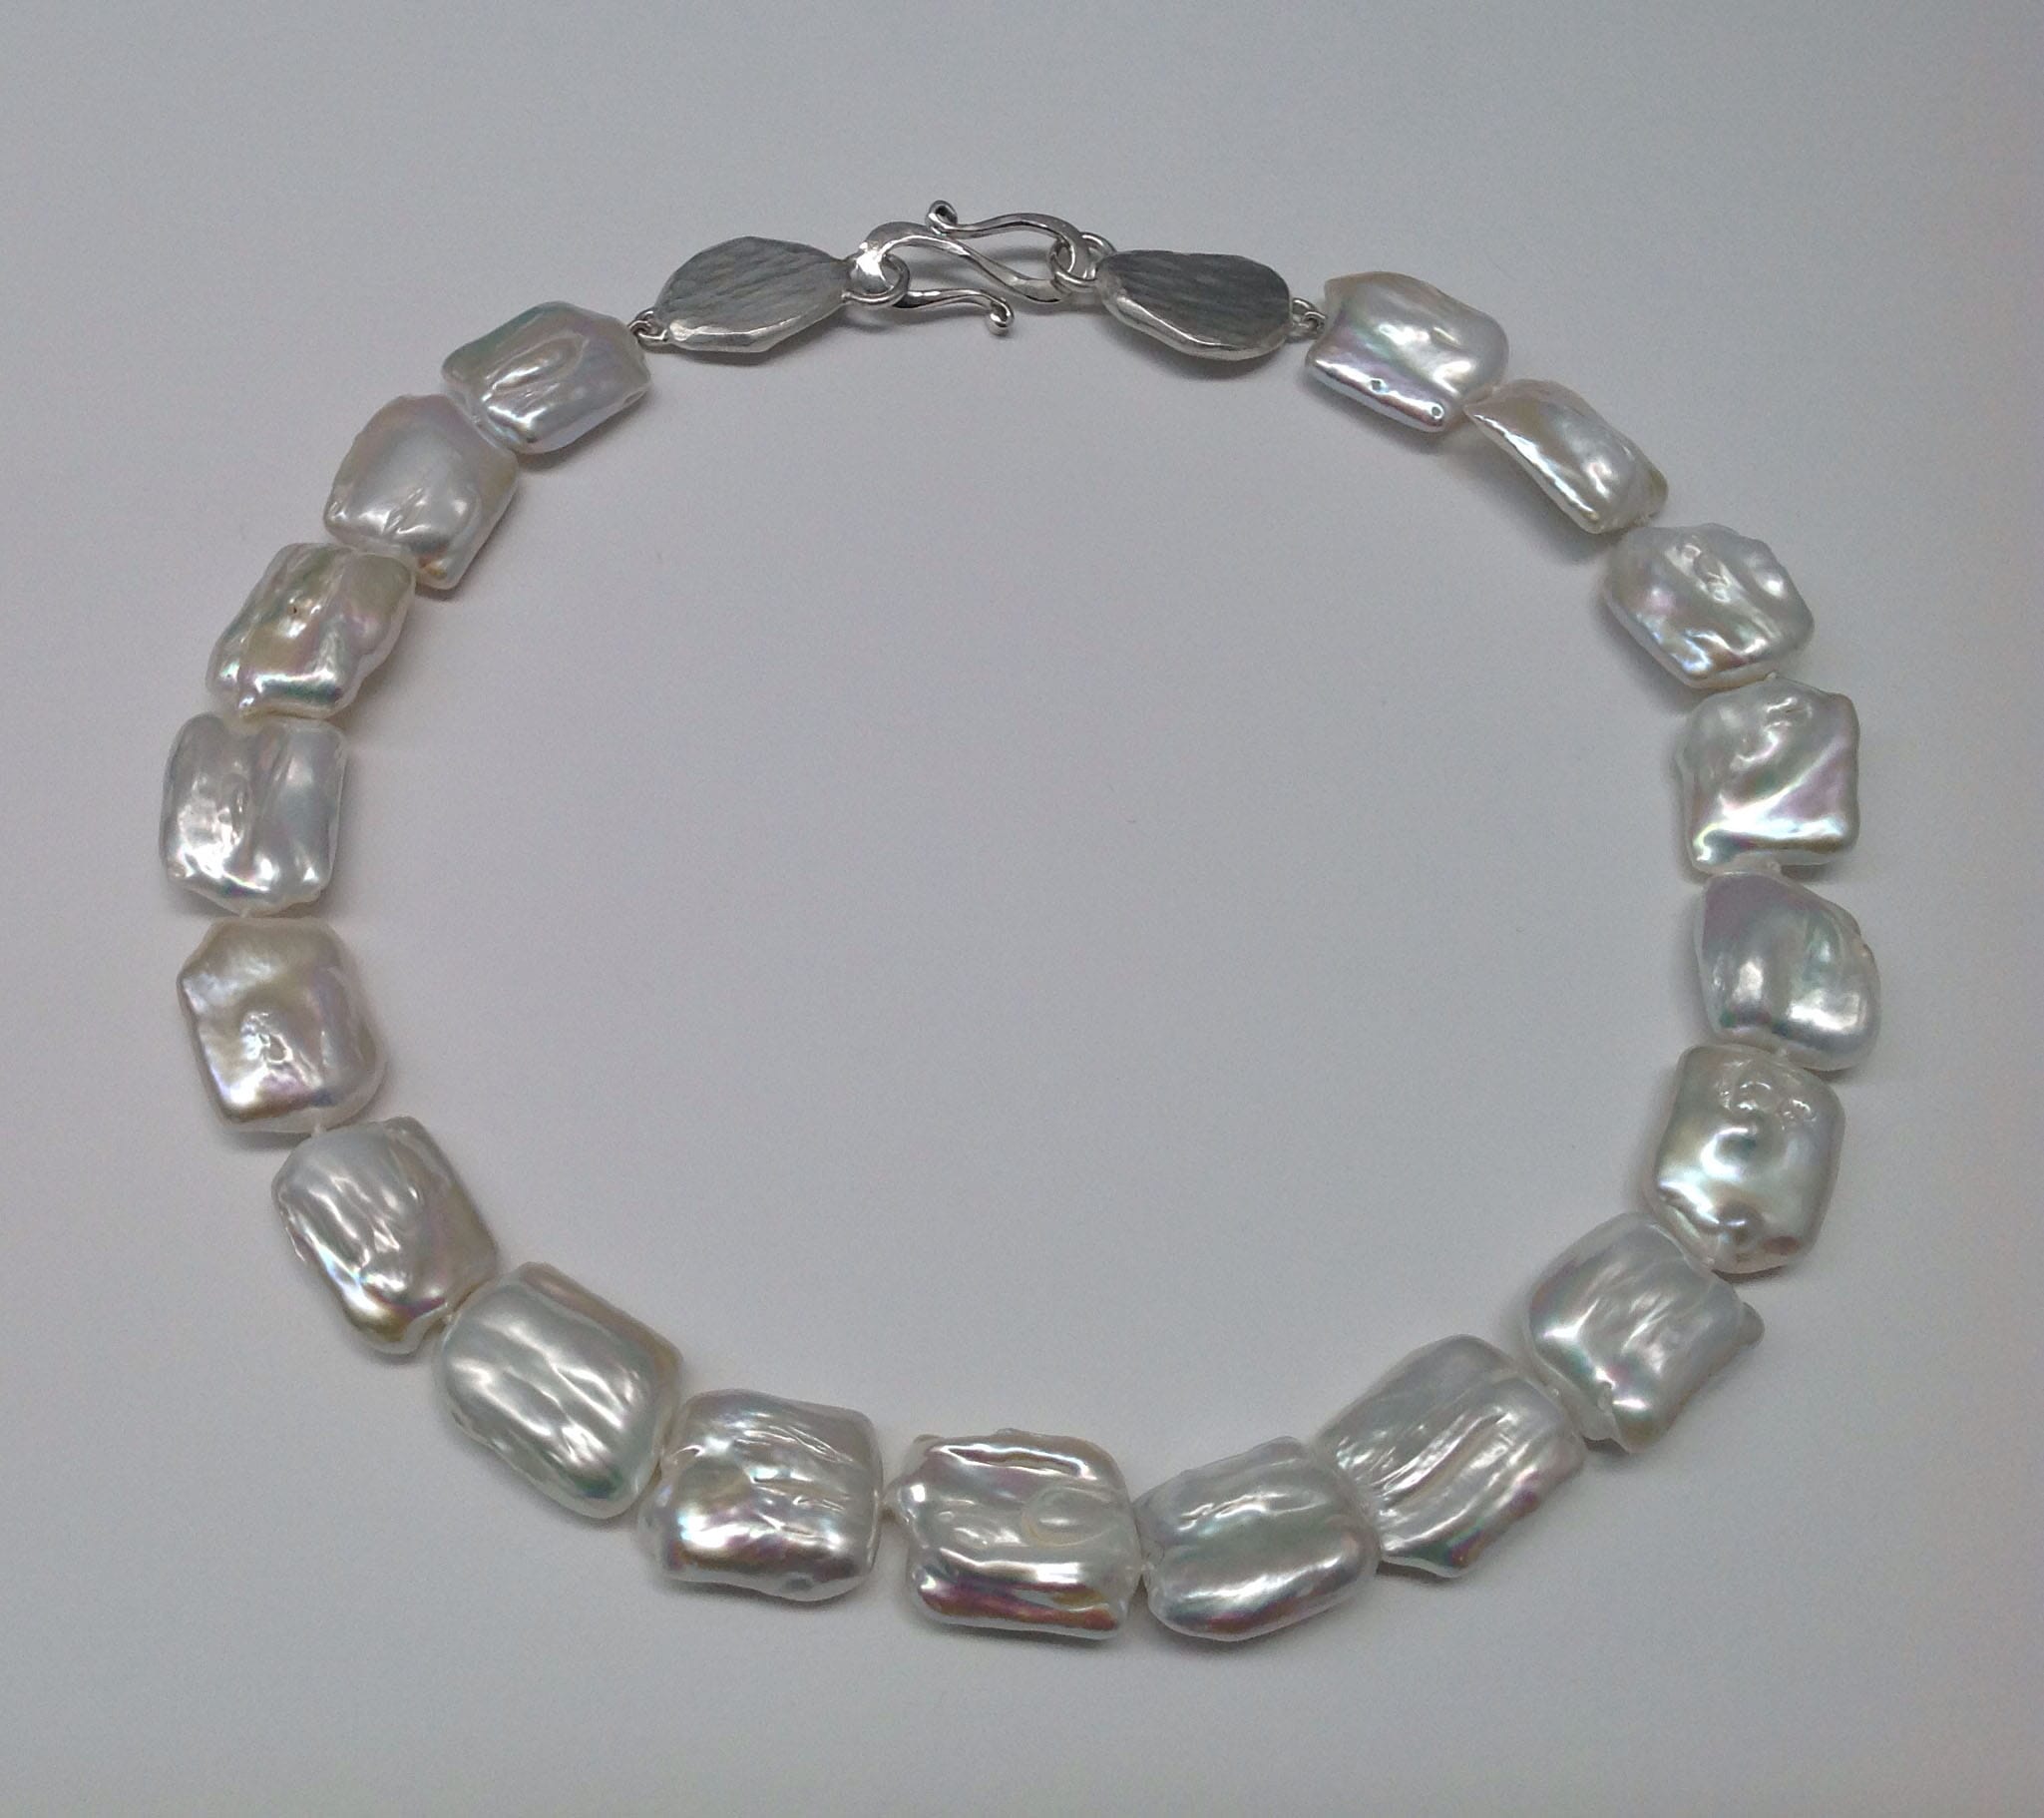 Cushion shaped silver white freshwater pearls, sterling silver clasp